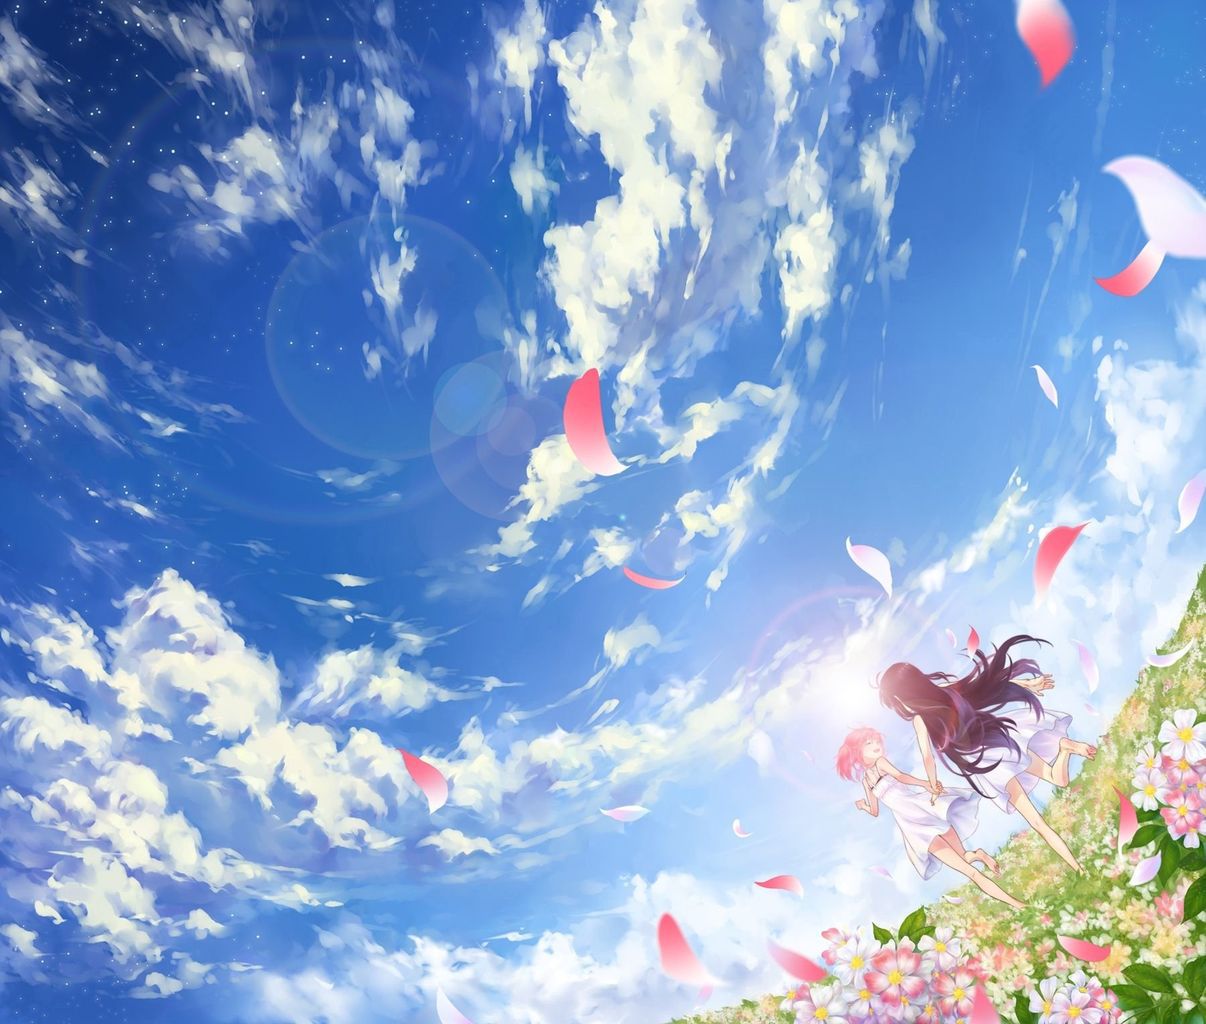 [2nd] Refreshing Blue sky is a beautiful secondary image 4 [non-erotic] 16